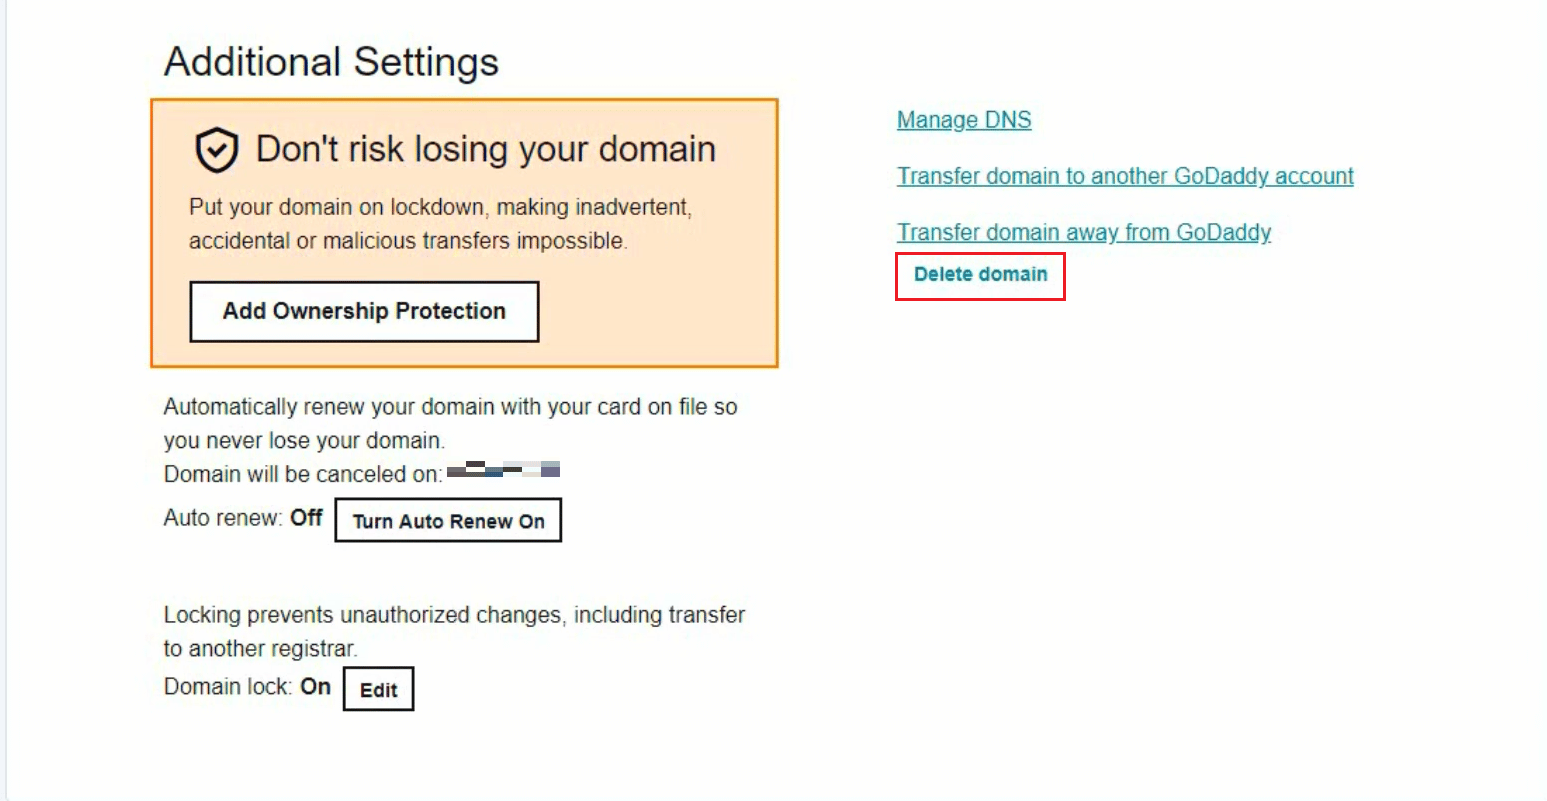 Scroll down to the bottom and click on the Delete domain option from the Additional settings section | delete GoDaddy domain